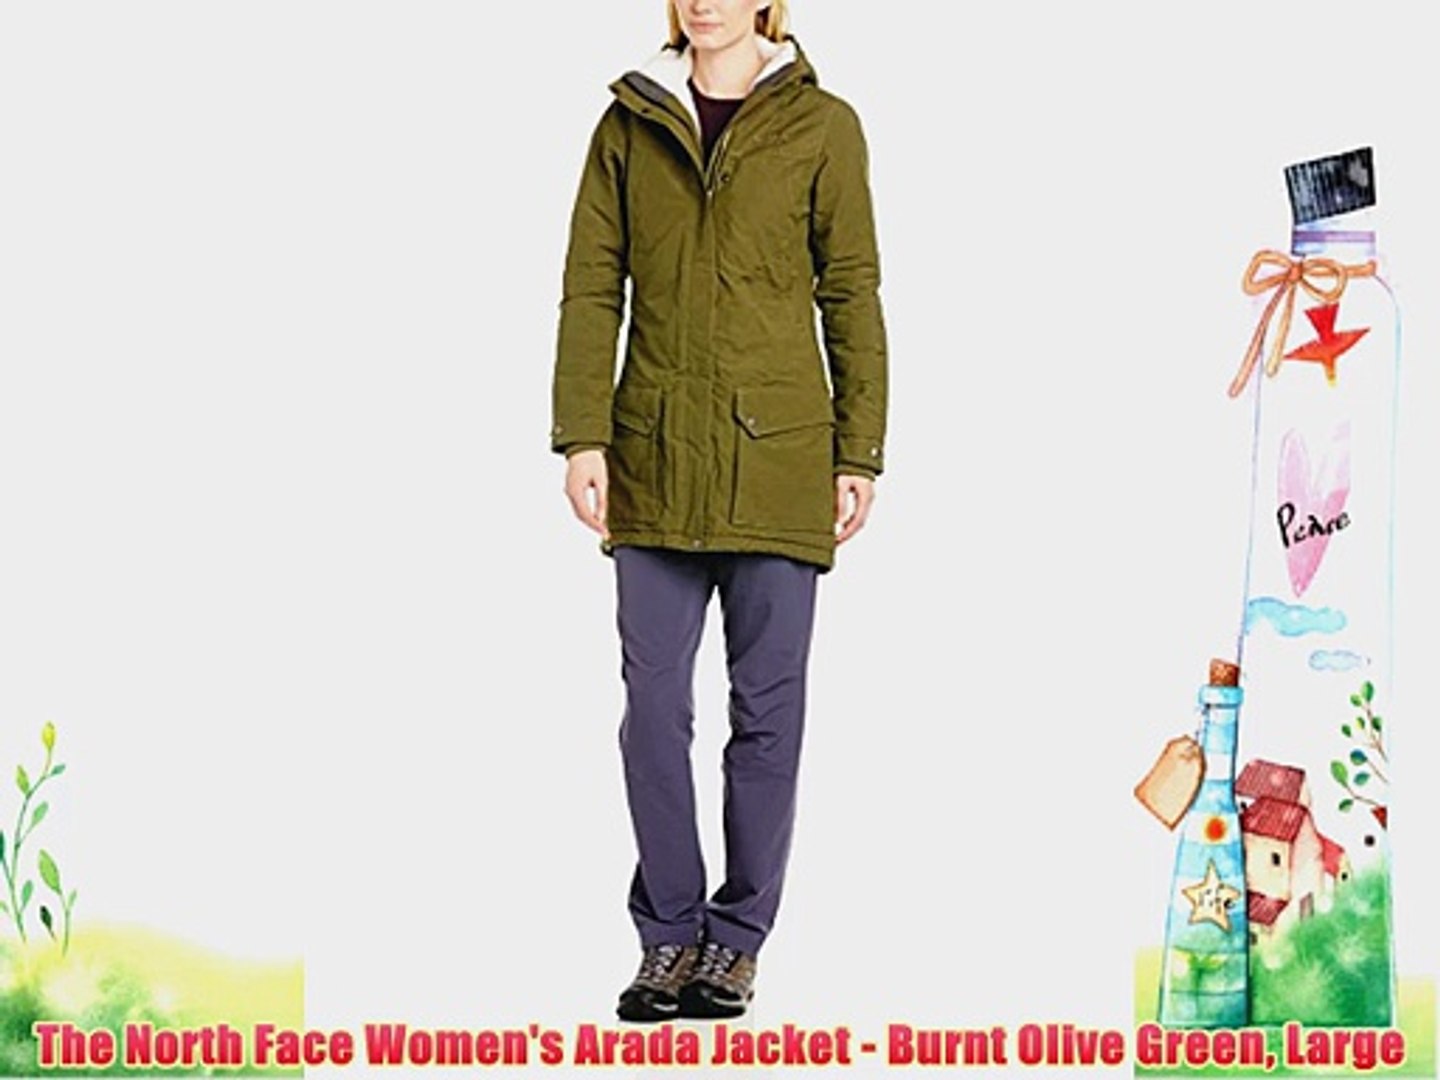 The North Face Women's Arada Jacket - Burnt Olive Green Large - video  Dailymotion